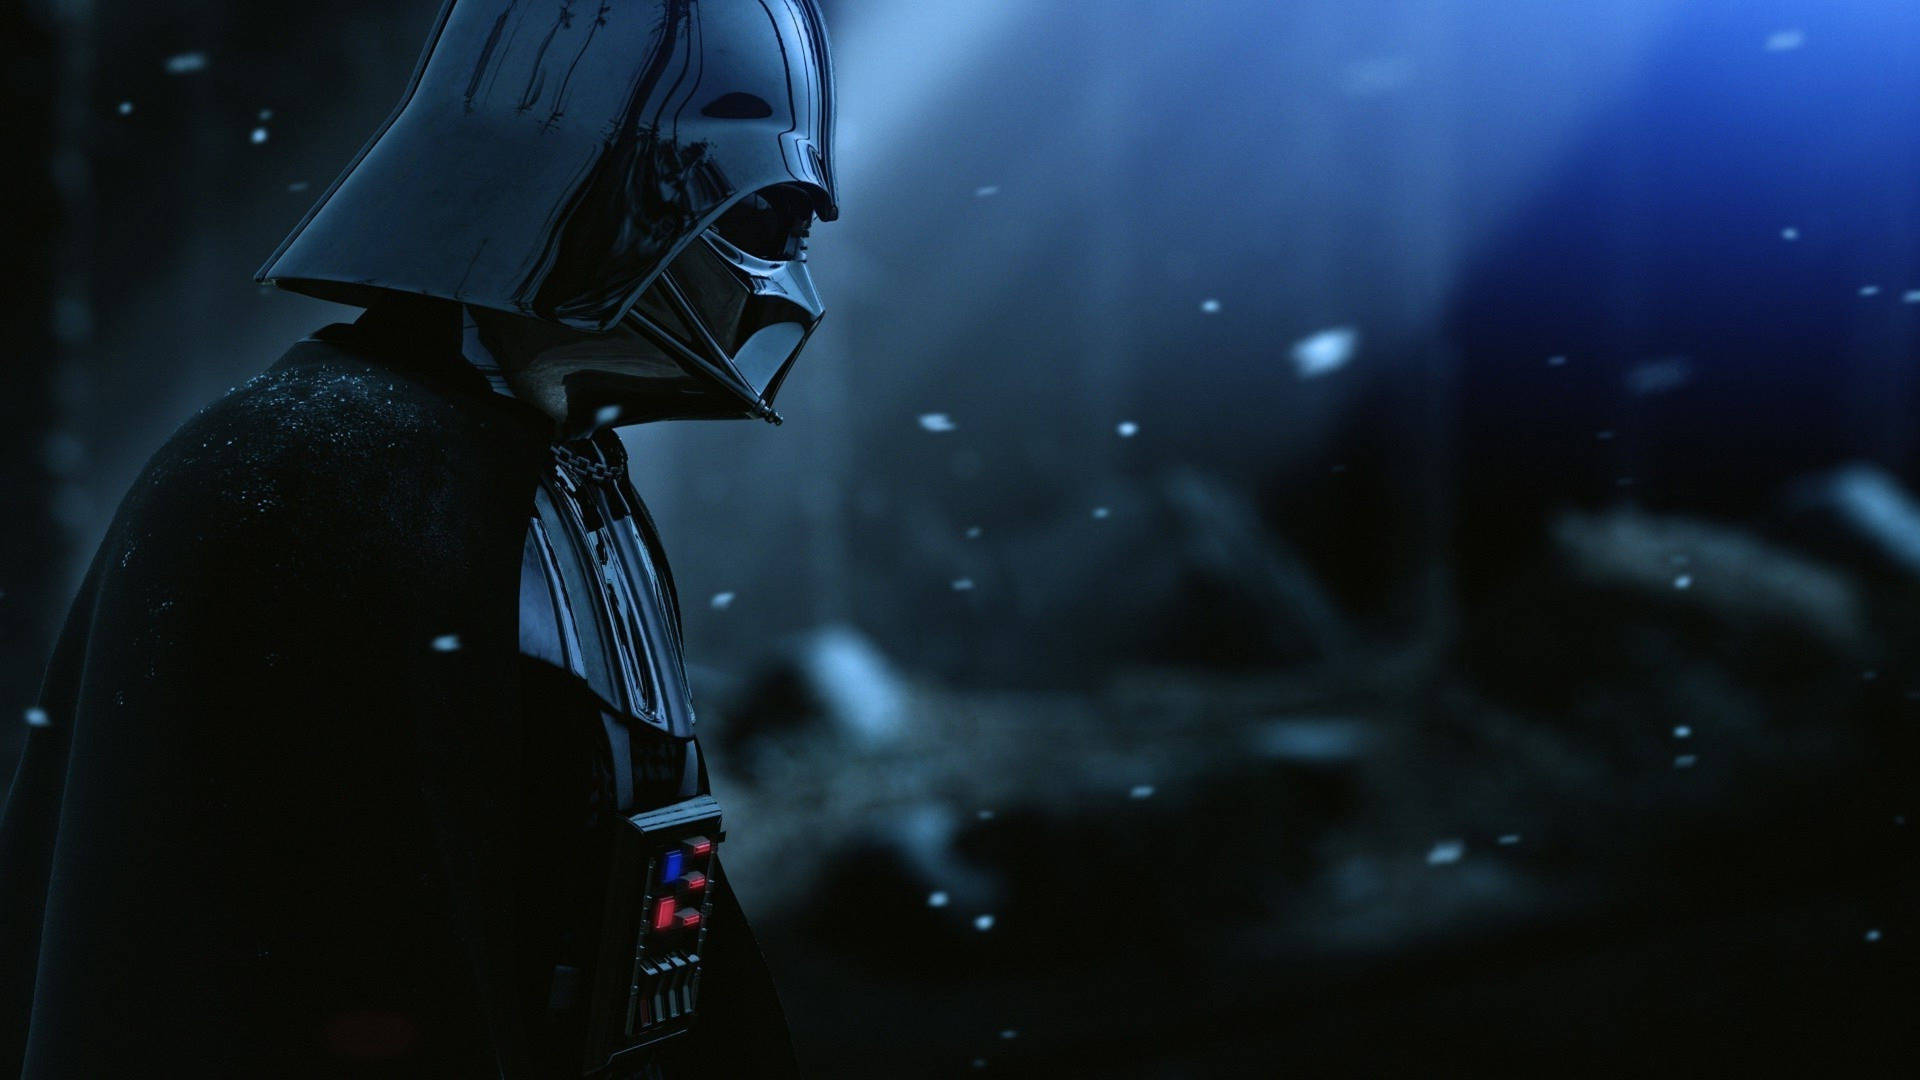 "Powerful Sith Lord Darth Vader stands ready to rule the galaxy" Wallpaper